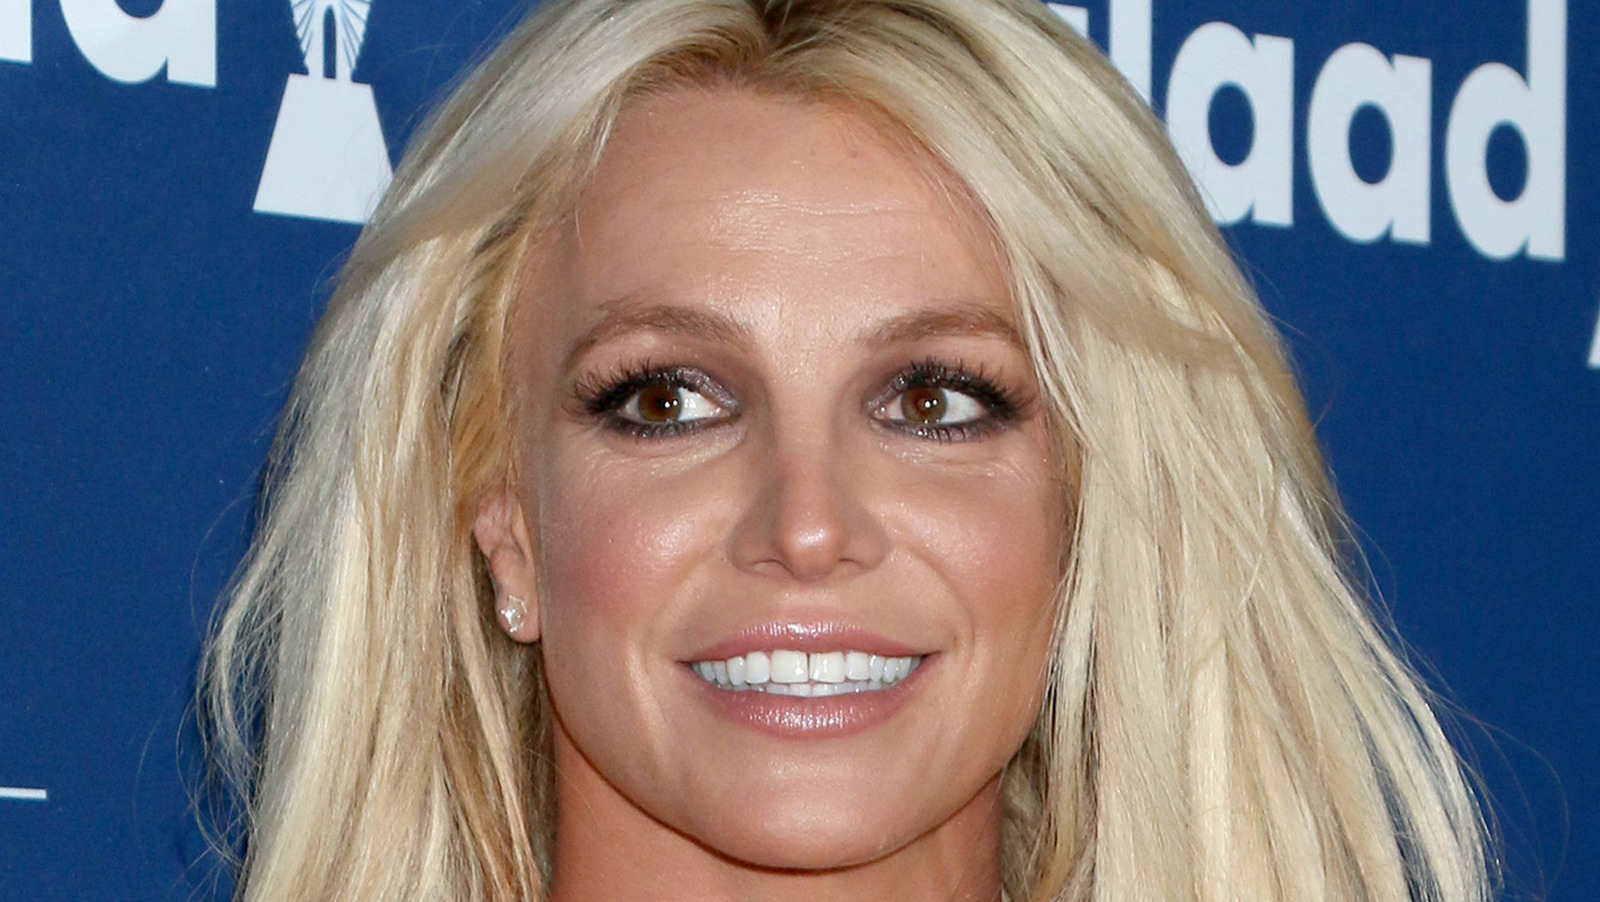 will britney spears go on tour again